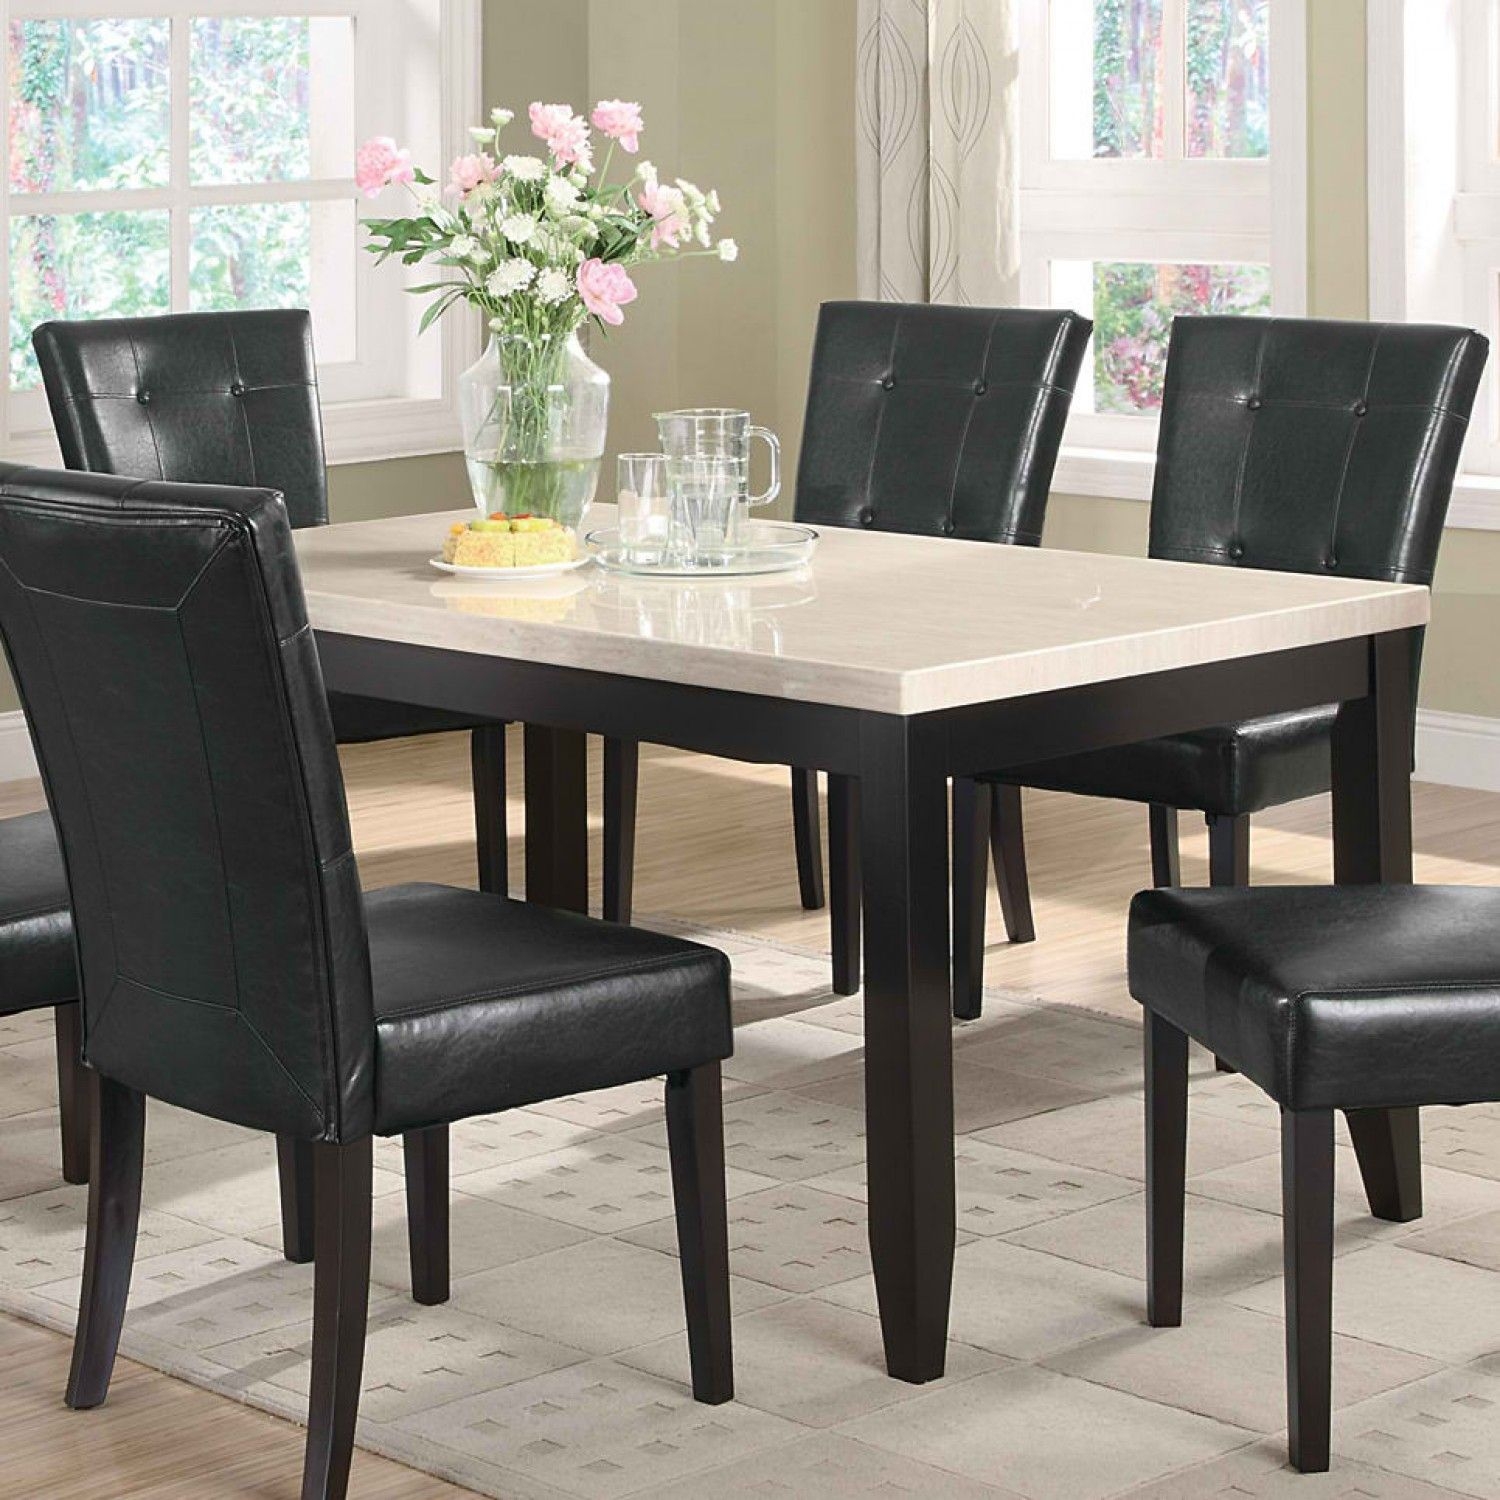 Coaster Home Furnishings 102771 Casual Dining Table, Cappuccino